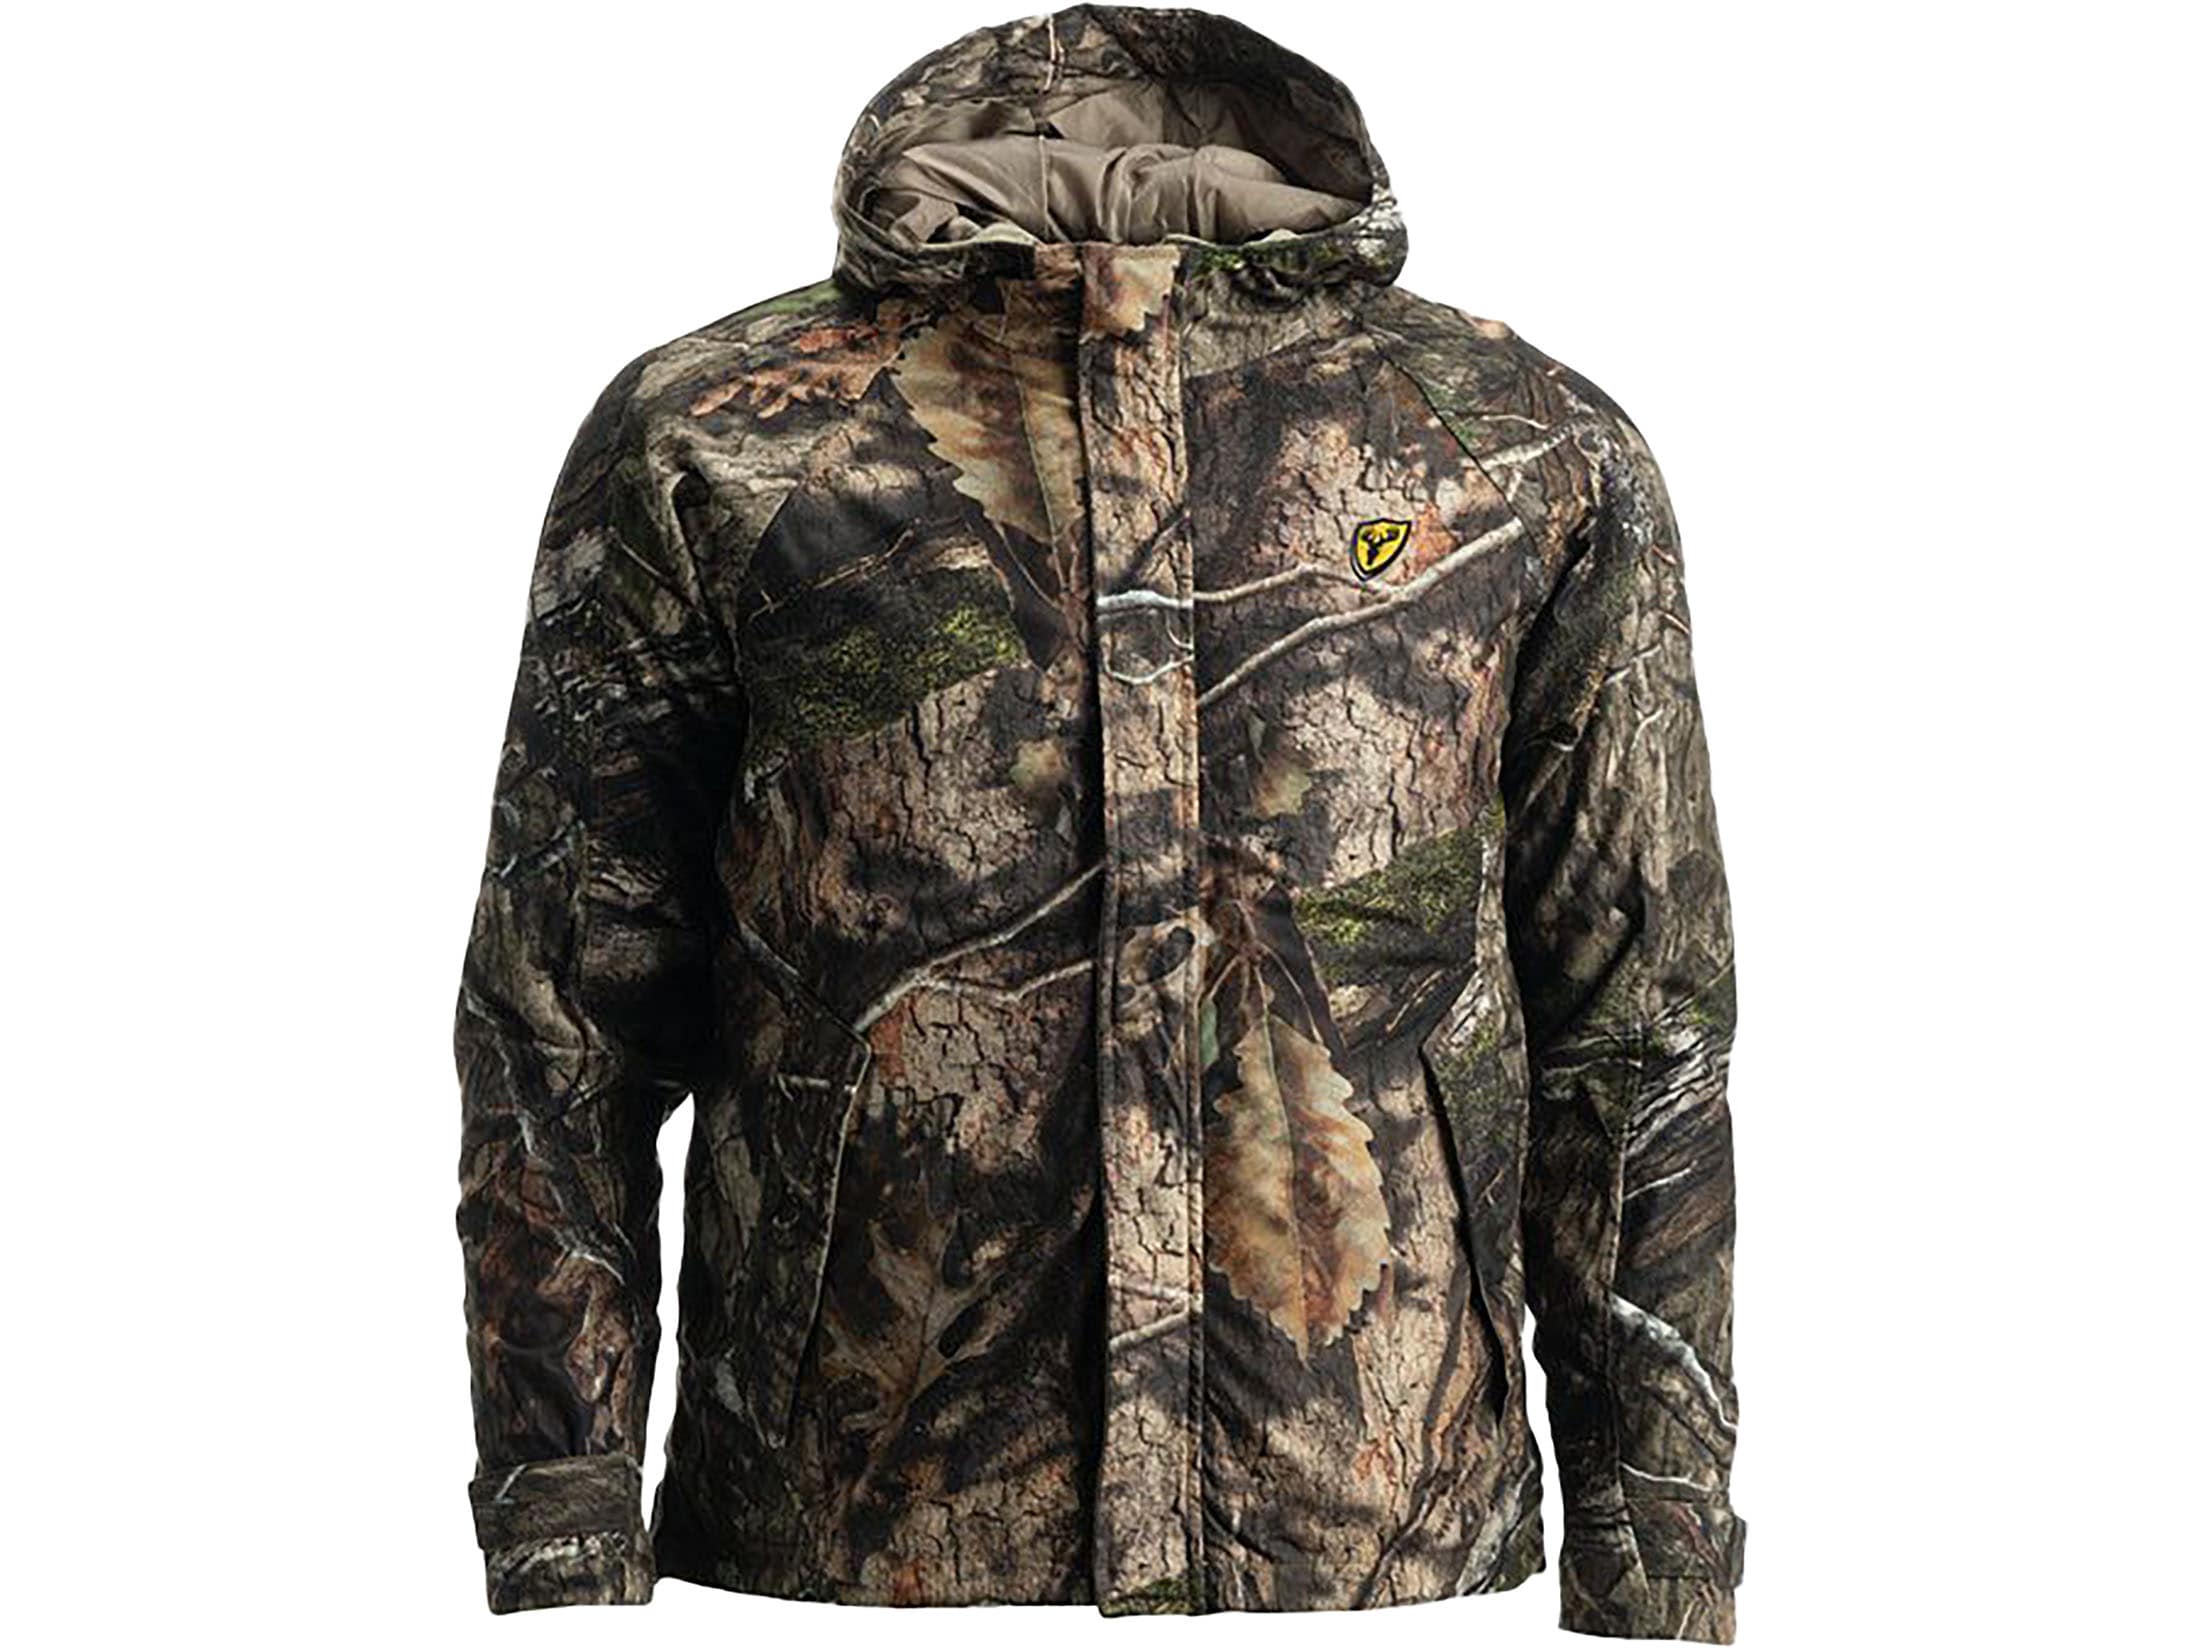 Blocker Outdoors Men's Drencher Insulated 3-in-1 Jacket Realtree EDGE